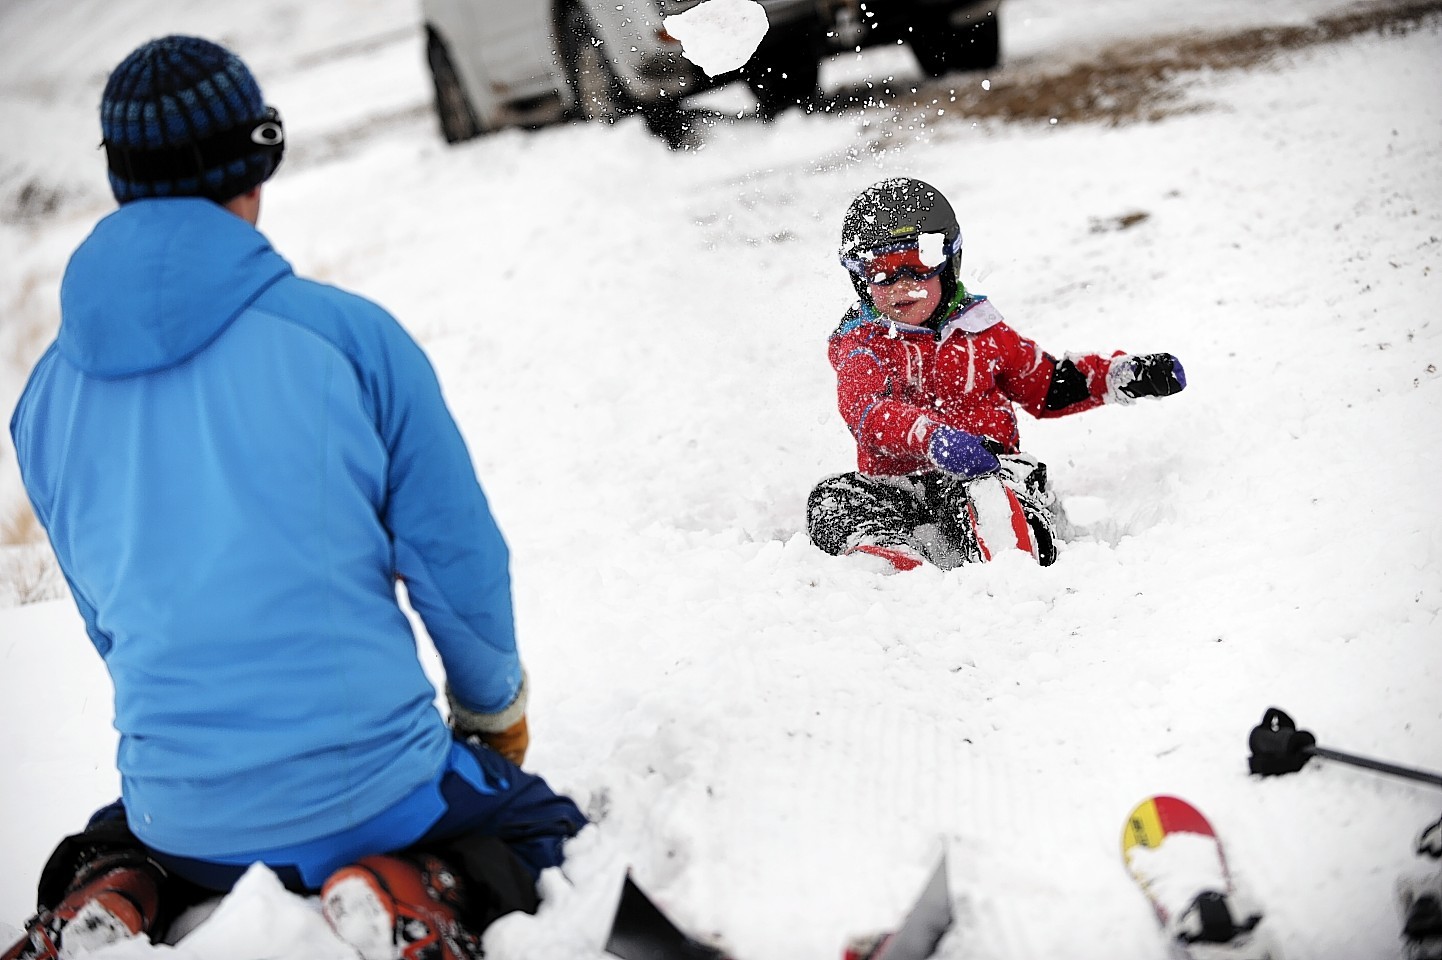 Paul Easto, takes a break from skiing at the Lecht to play in the snow with his son, Euan